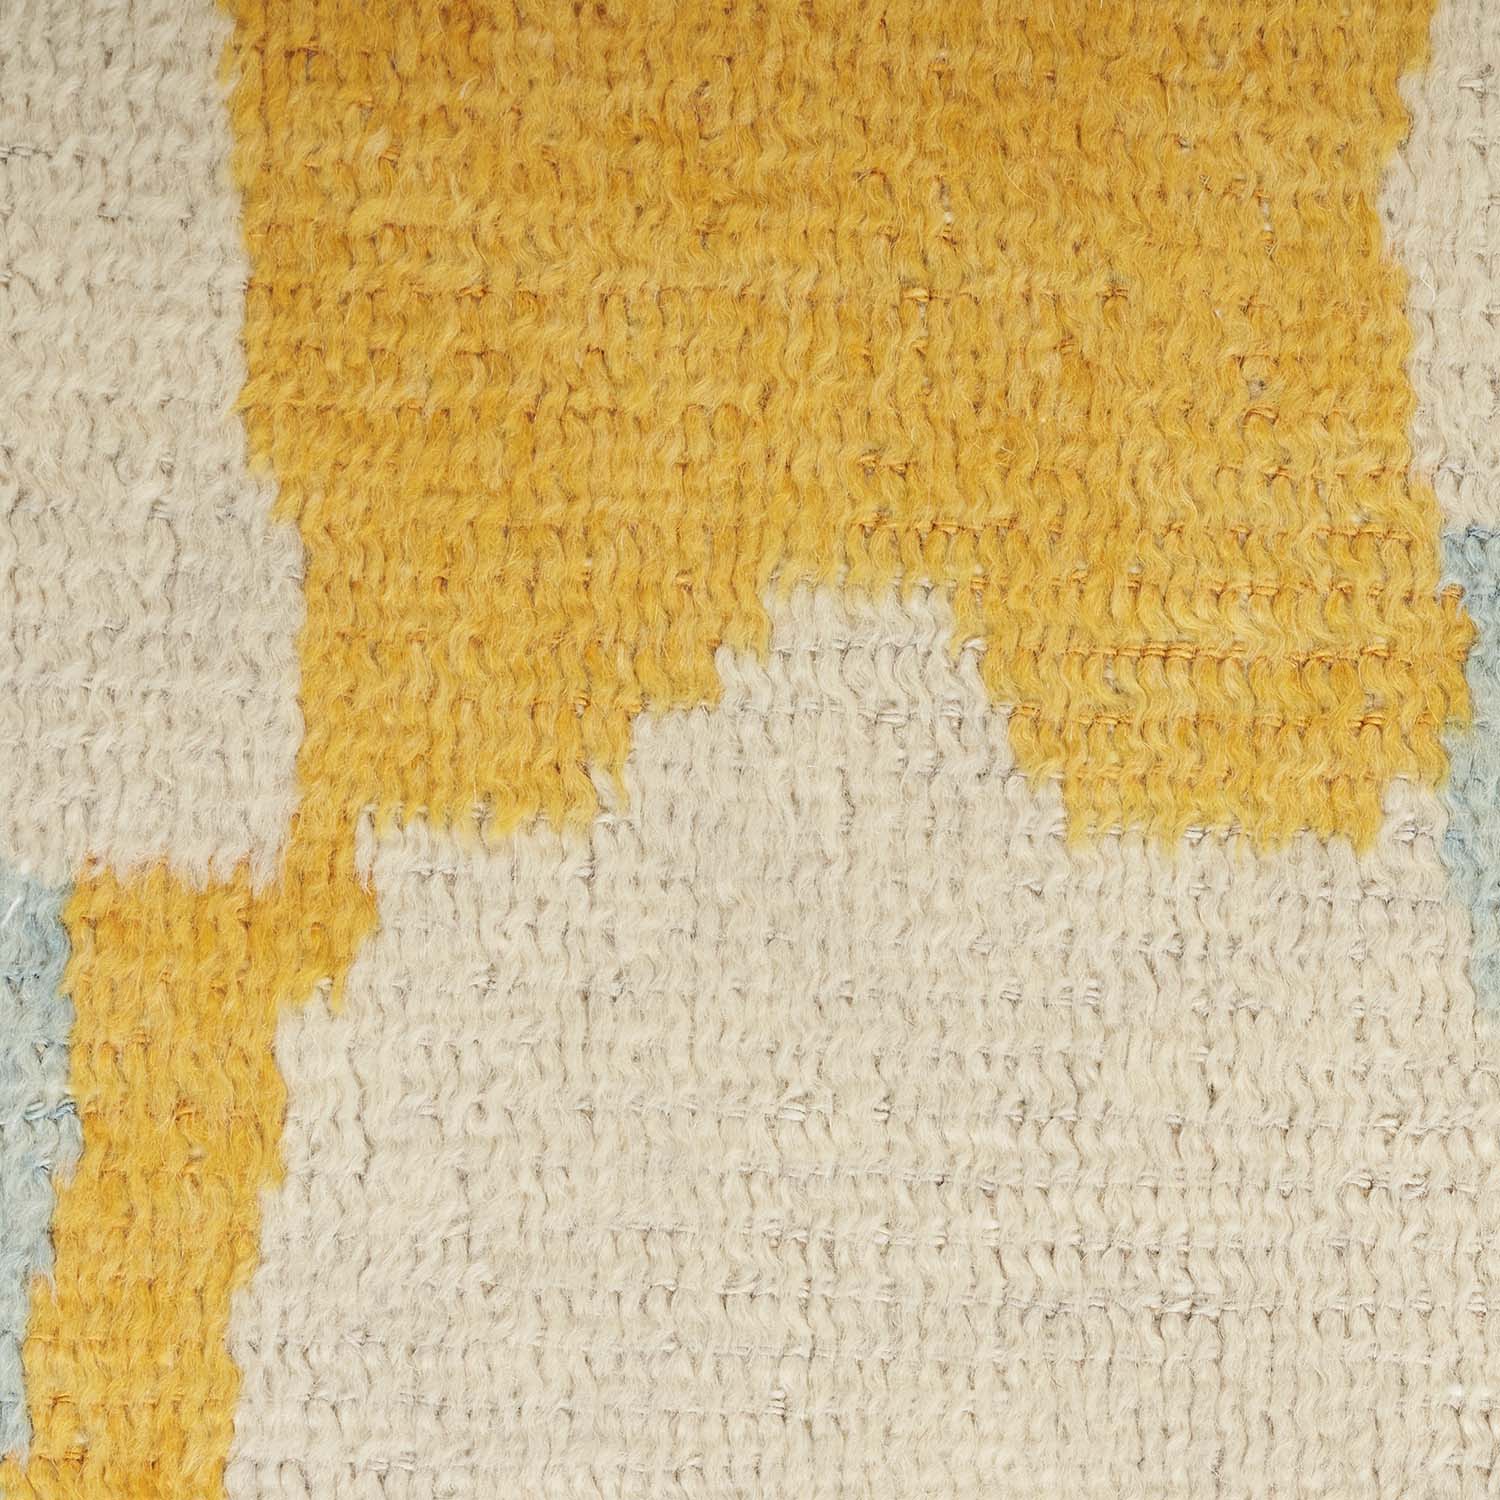 Close-up of textured fabric with vertical stripes in warm colors.